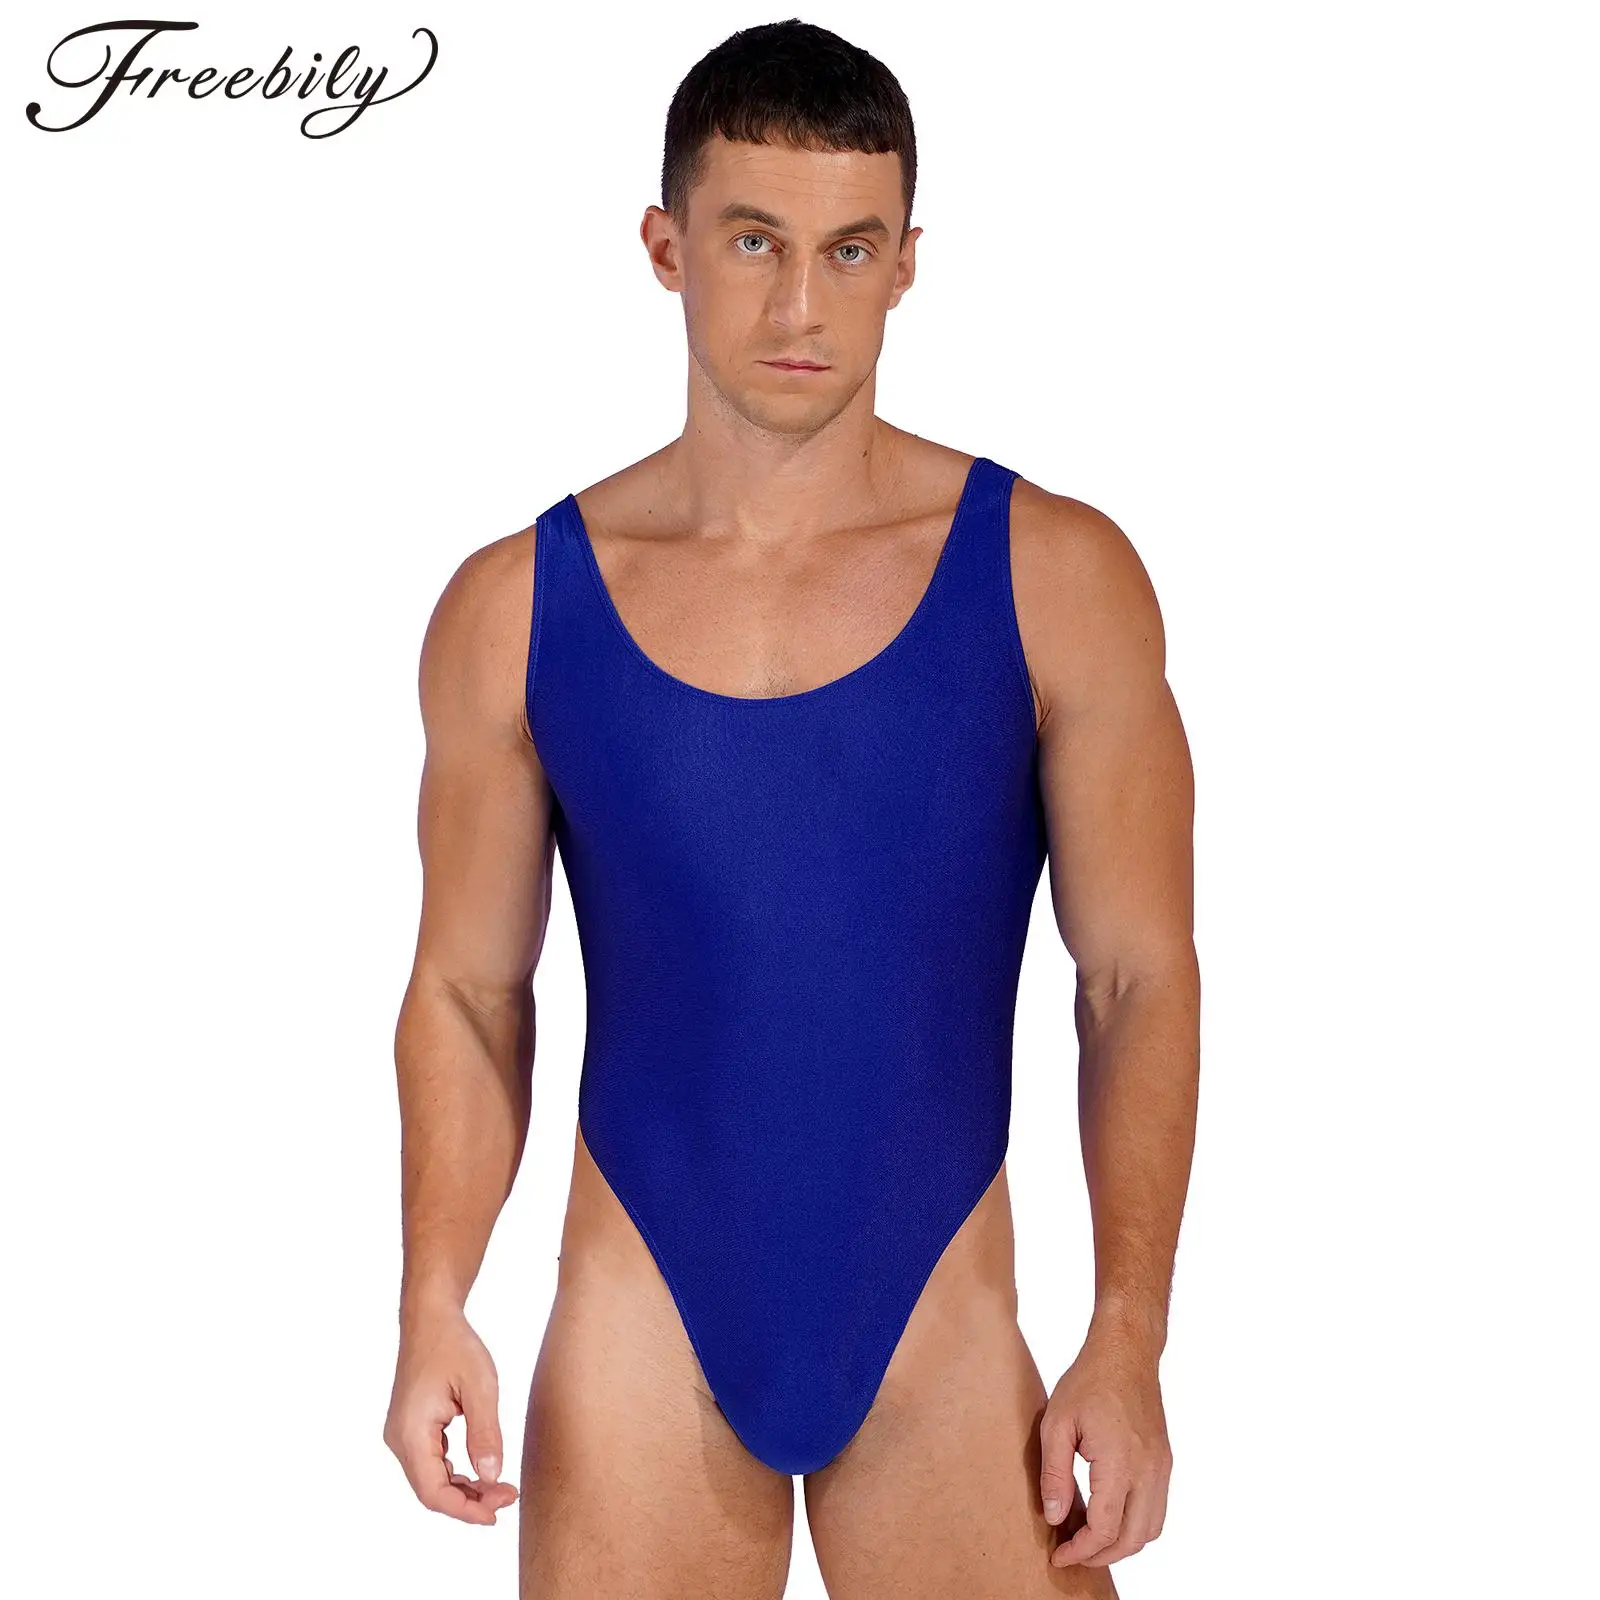 https://ae01.alicdn.com/kf/S5b12fe244a7545e98bf696c2456b6318I/Men-One-Piece-Thong-Body-Suits-Swimsuits-Fashion-Sleeveless-High-Cut-Bodysuit-Low-Back-Stretch-Solid.jpg